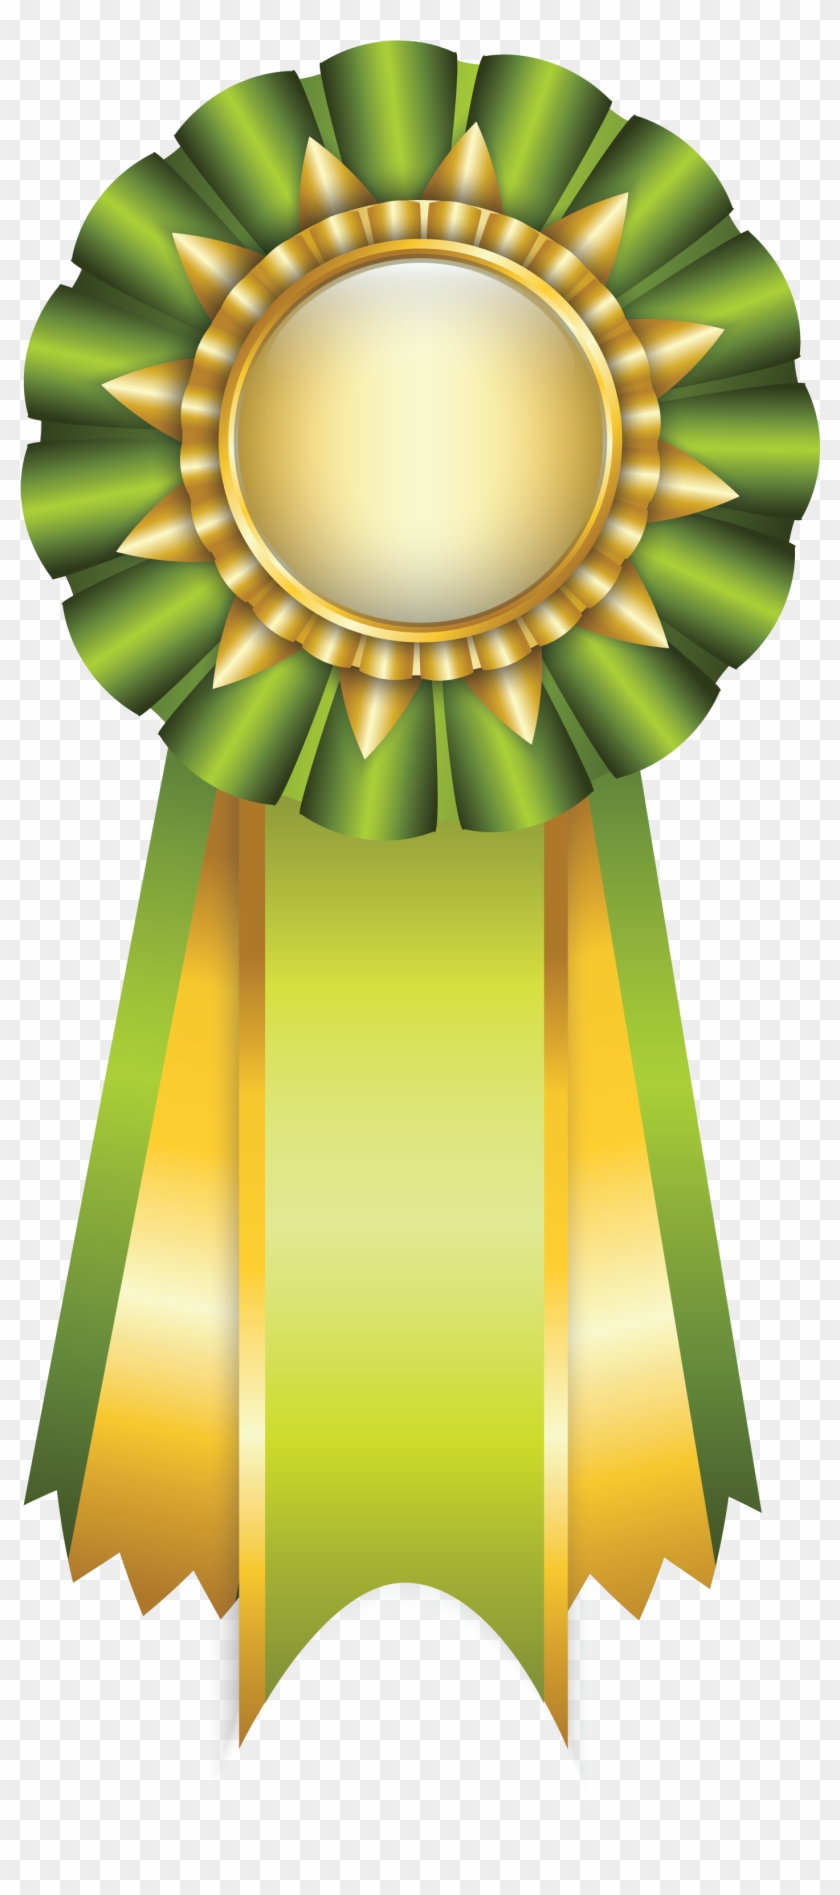 Green Rosette Ribbon Png Clipart Picture - Medals And Ribbons Png #332508